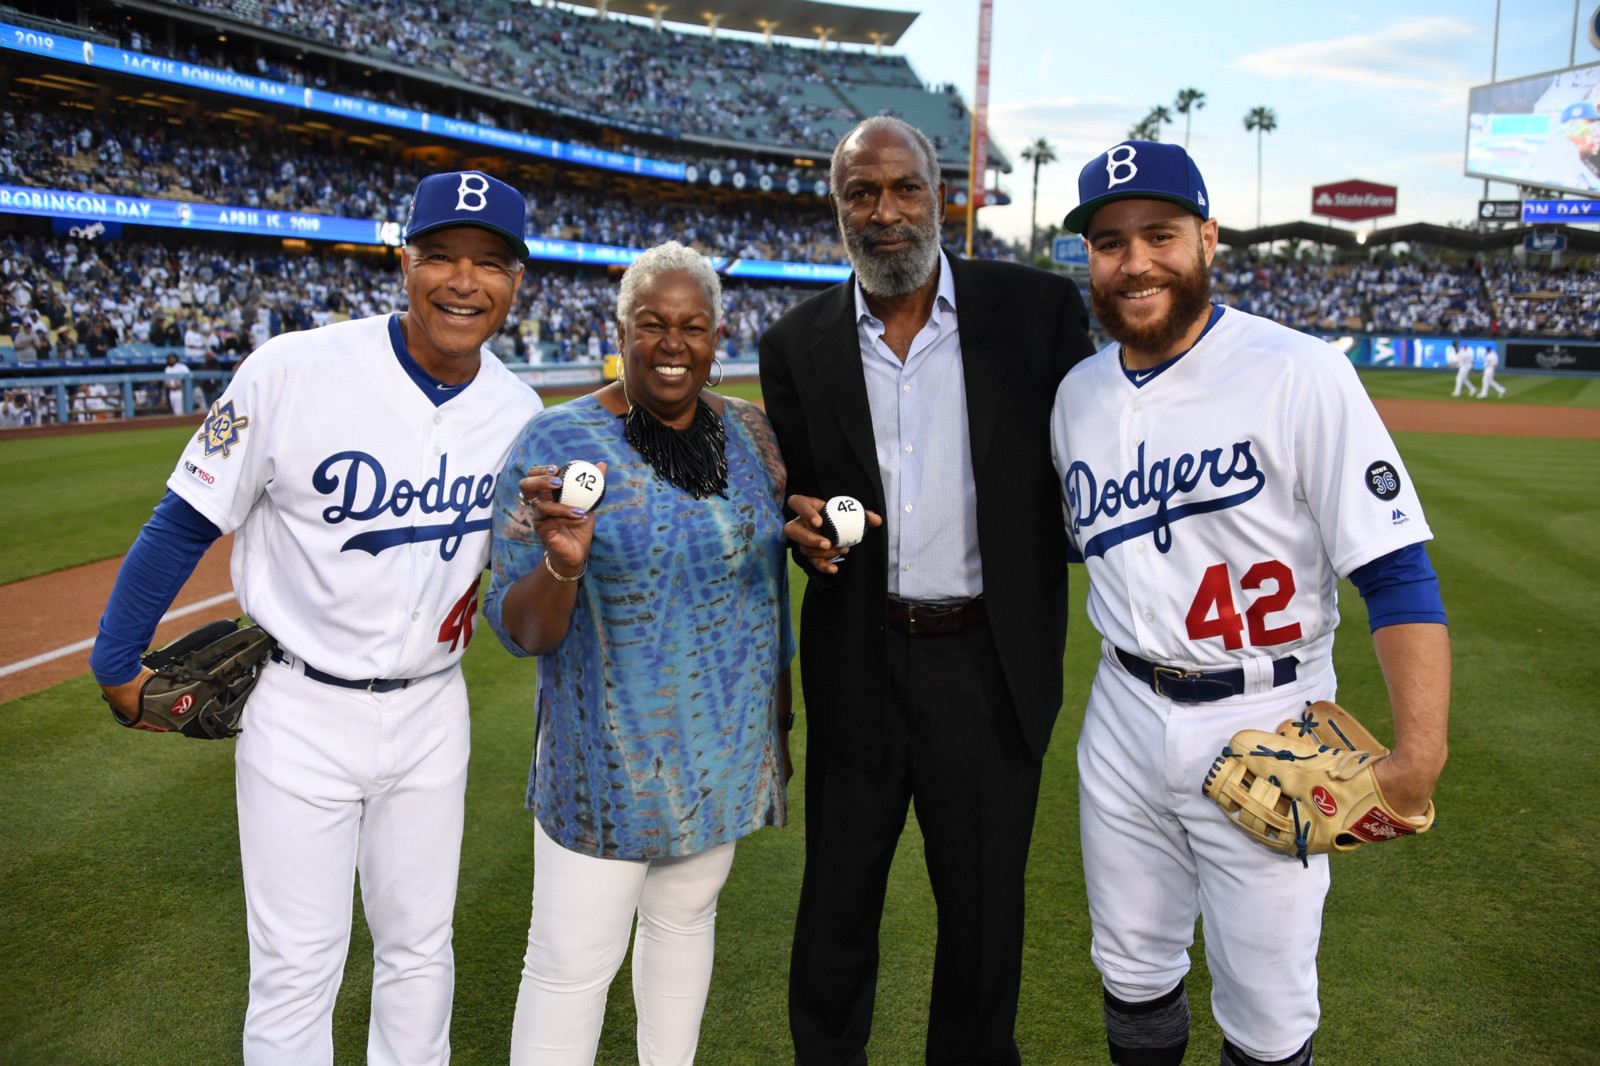 MLB celebrates Jackie Robinson Day every year on April 15